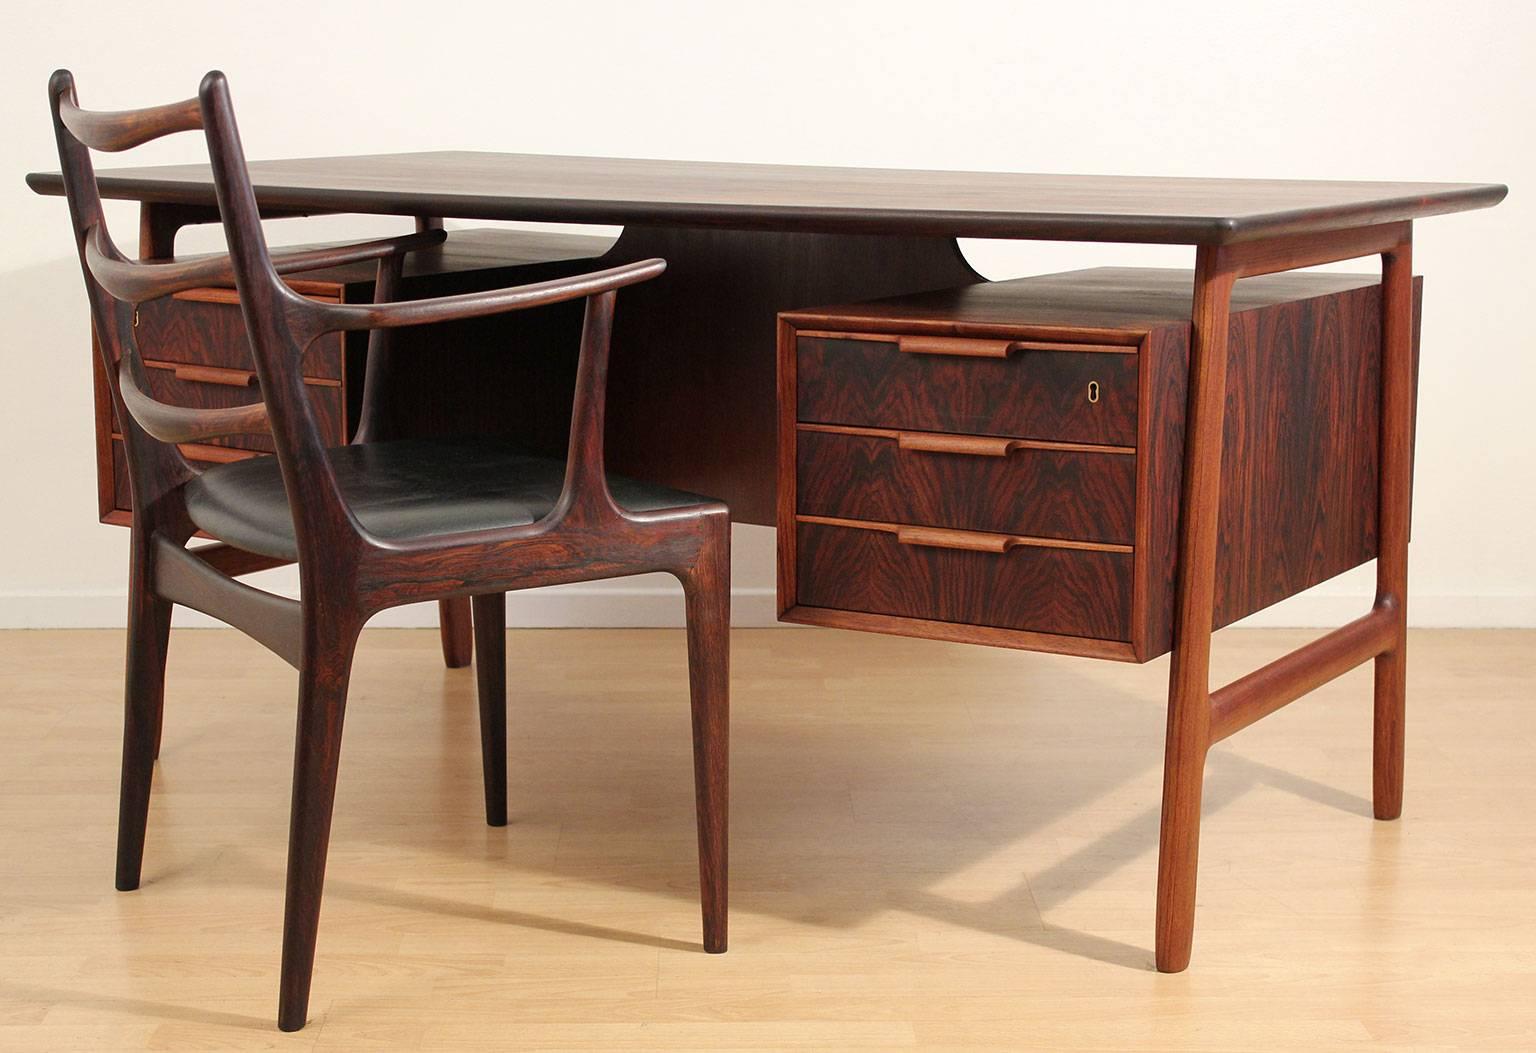 Excellent designed Danish rosewood executive desk and chair by Gunni Omann for Omann Juns Møbelfabrik, Denmark, circa 1960. Desk has the original key to lock the drawers. Has book shelves on the front of the desk with a center compartment. Wonderful